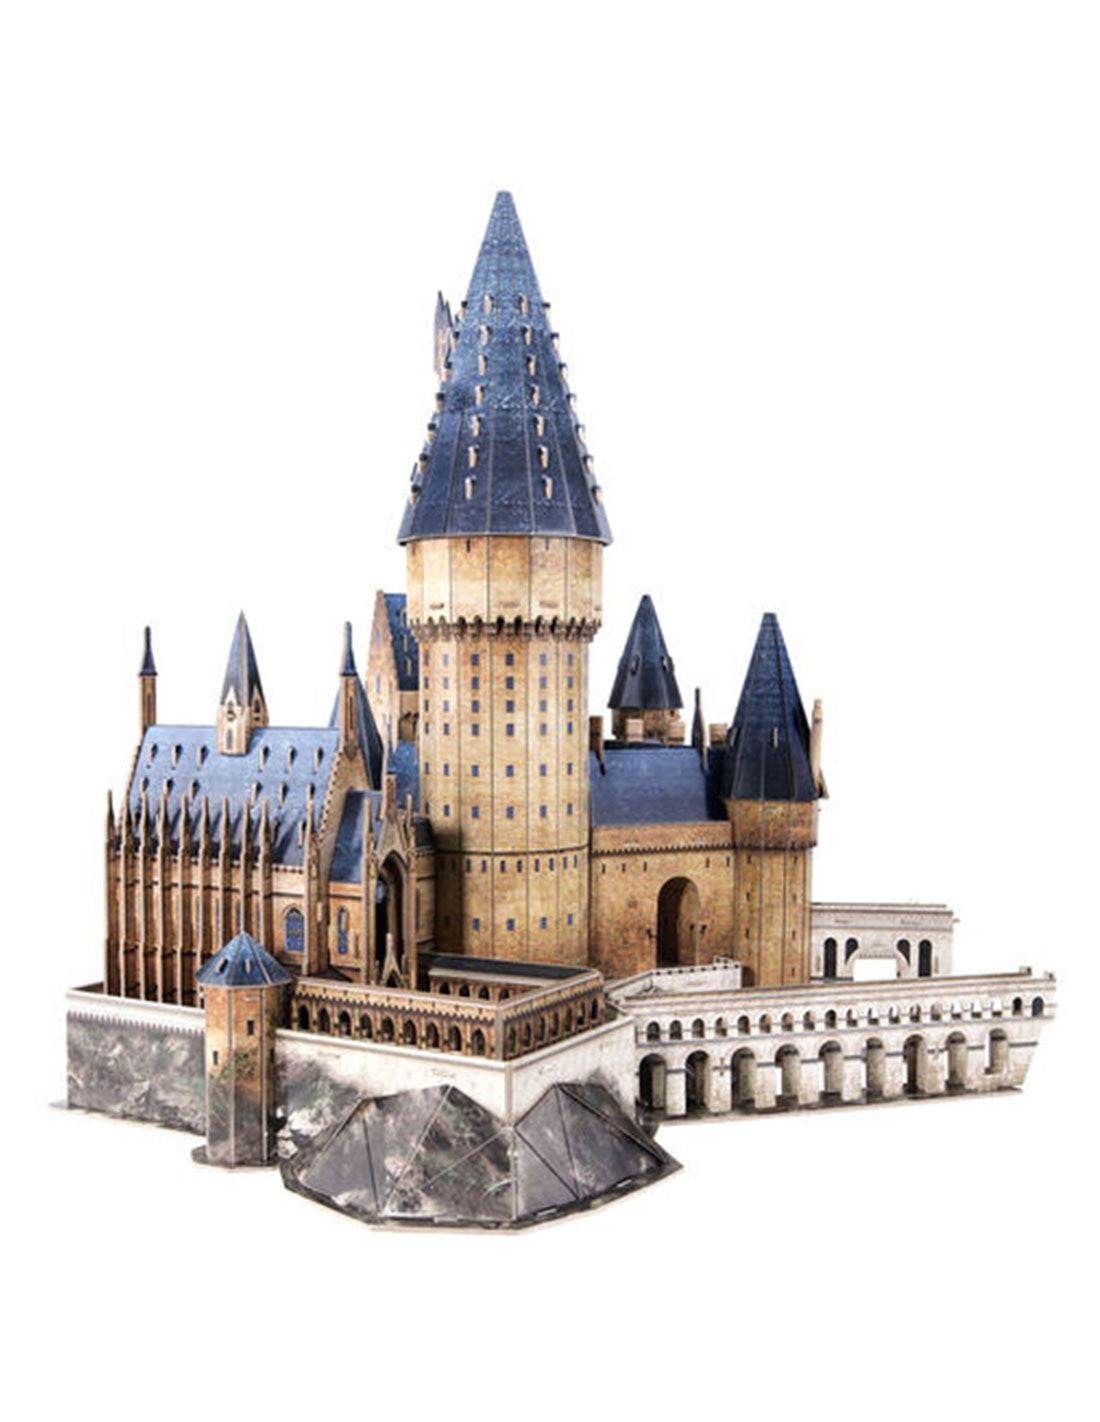 Harry Potter 3D Puzzle - Hogwarts Great Hall